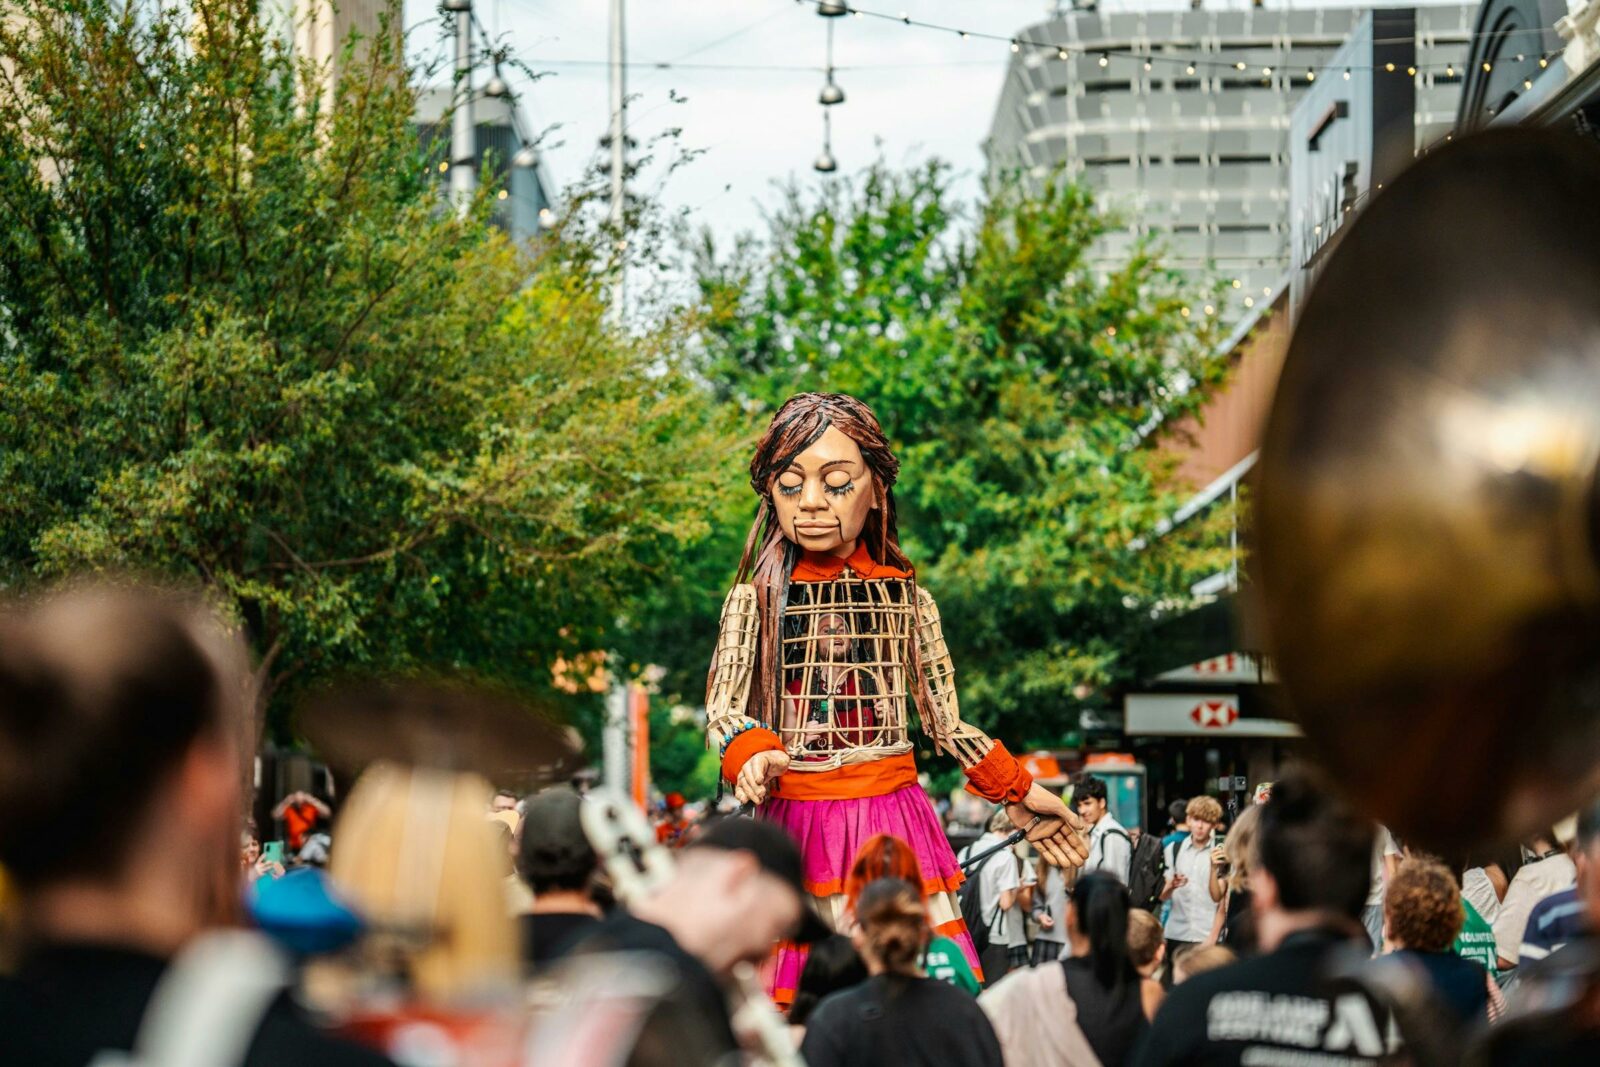 A 3.5m tall puppet of a 10 year old girl is surrounded by a crowd. She has her eyes closed.